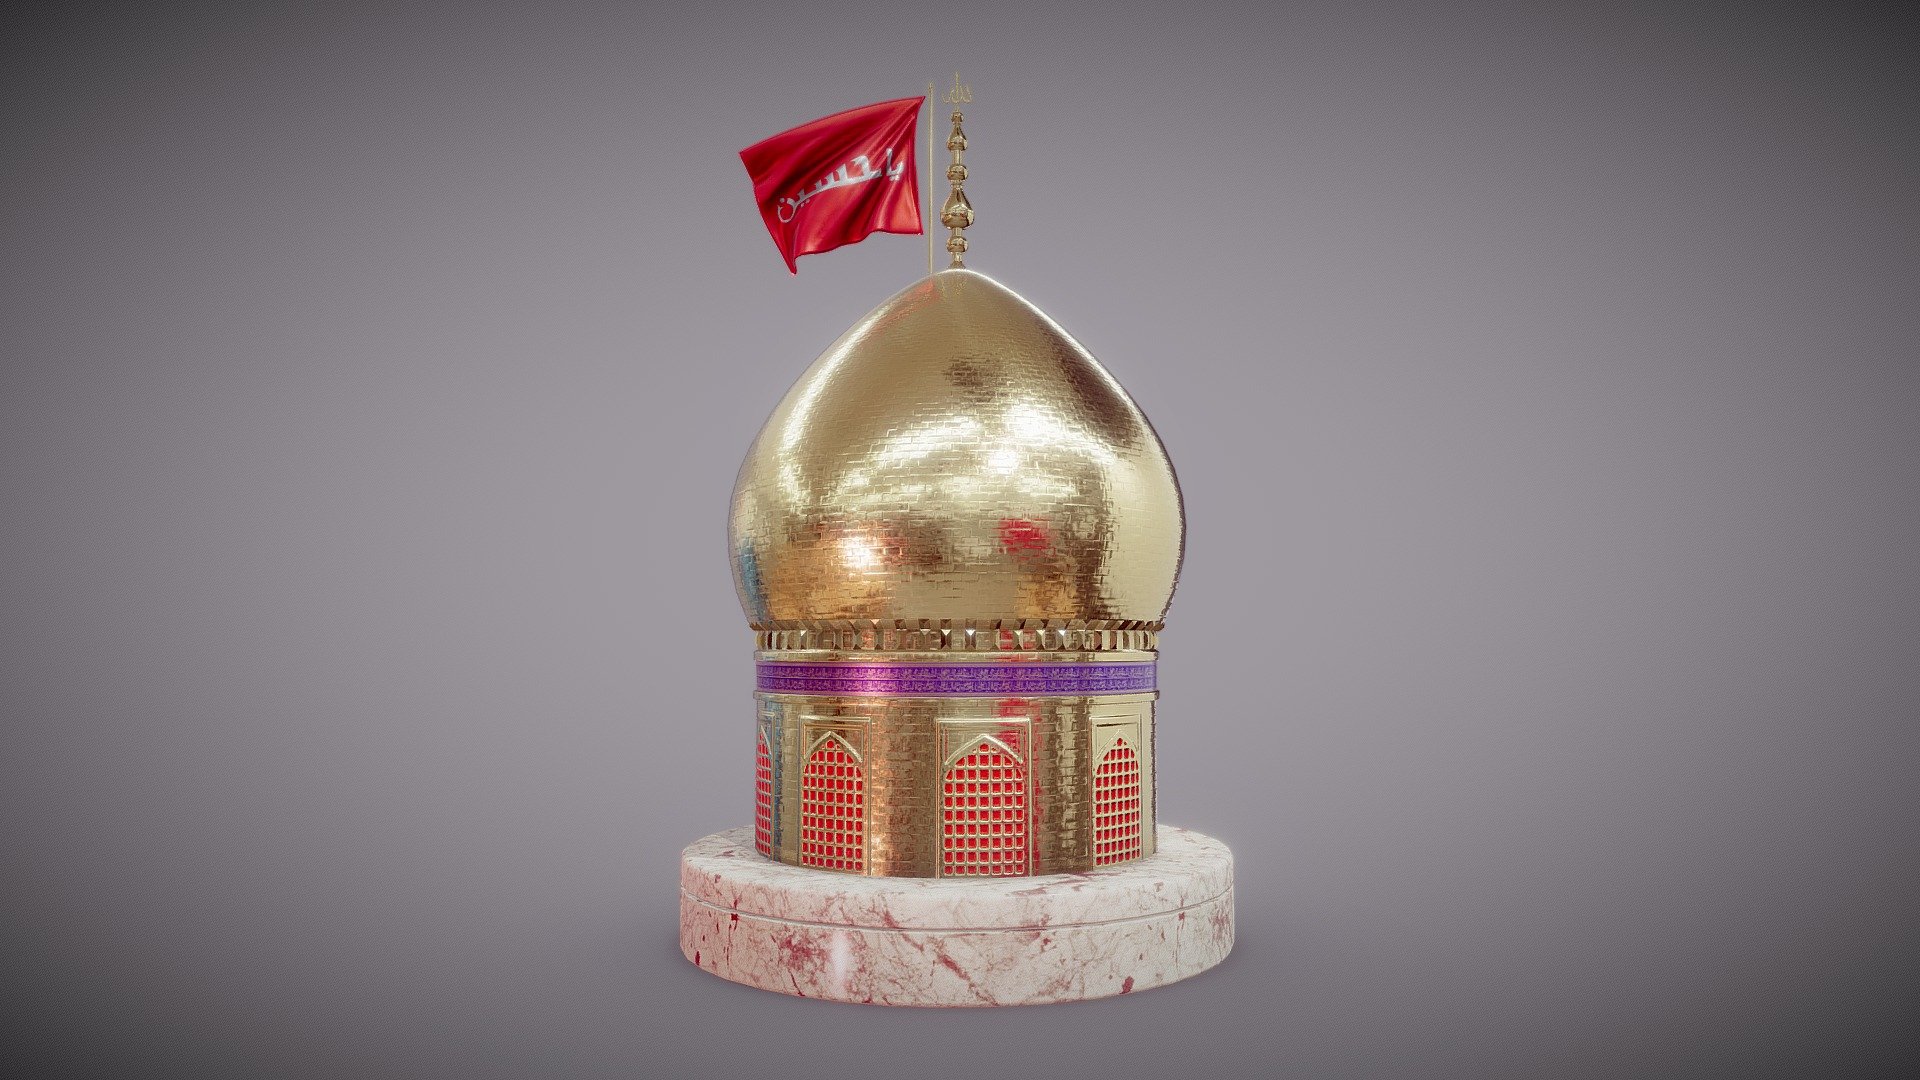 Dome
A Tribute To The Legend (IMAM E  HUSSAIN R.A)
Software used:
Modeling in Maya.
Texturing in Substance Painter.
Flag made in Marvalous Designer.
Other Textures and map created in Photoshop 3d model